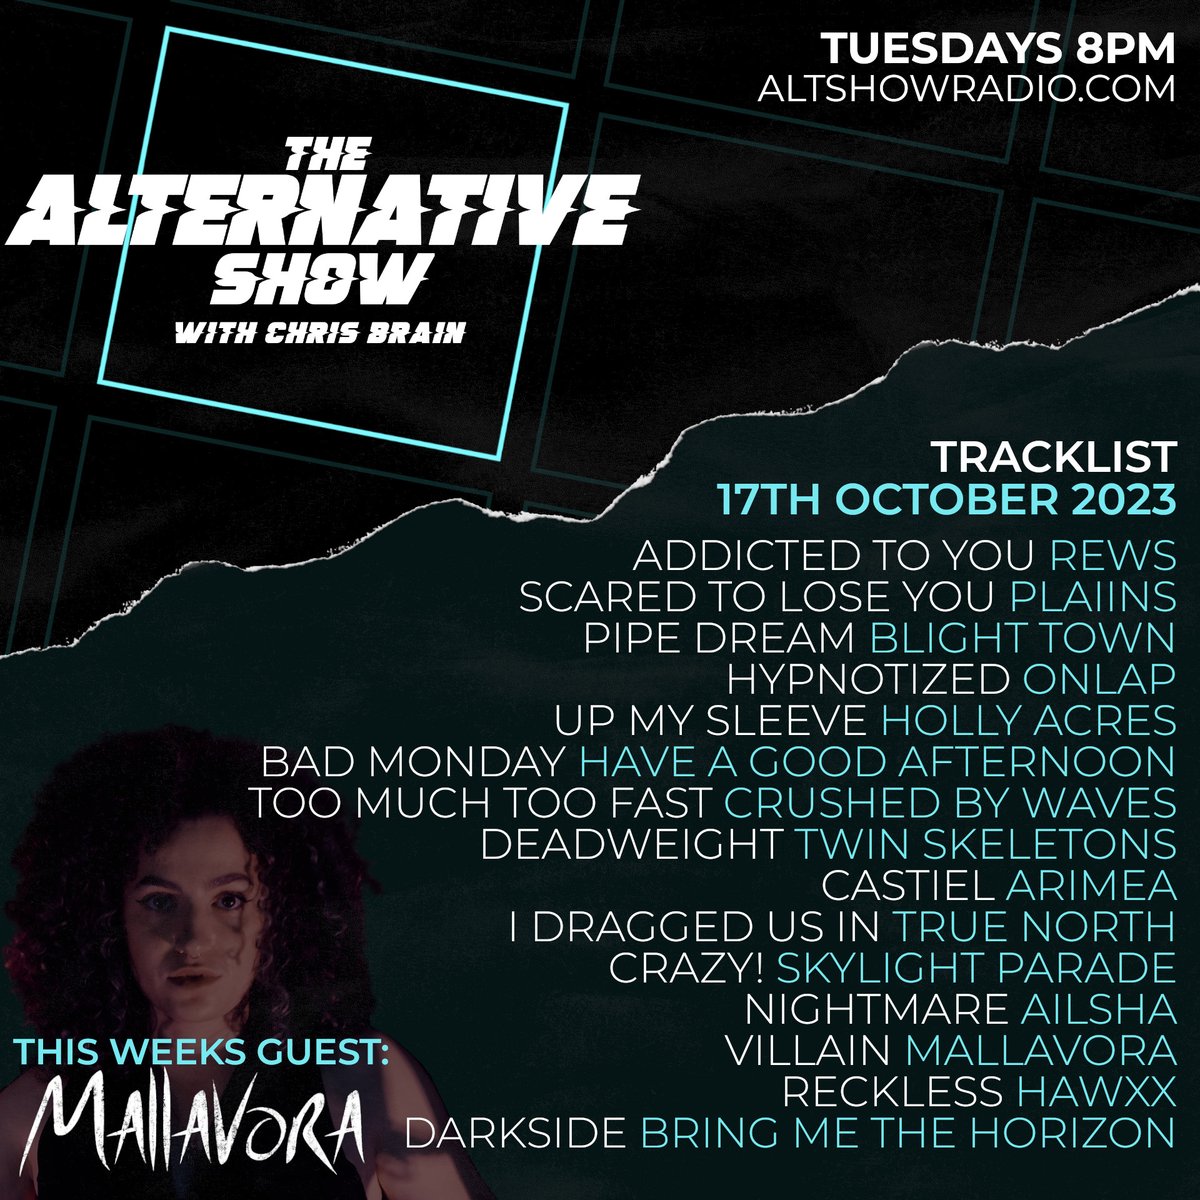 💥 LISTEN NOW! 👉 bit.ly/3S1U6zY 💥
I chat with Jess from Mallavora, this weeks 🔥 HOTTEST TRACK 🔥 from @ARIMEA_UK plus all these BANGERS!

Get your music over to me chris@altshowradio.com!

#alternative #emo #radio #poppunk #metal #altmetal #ukrock #bandinterview #rock